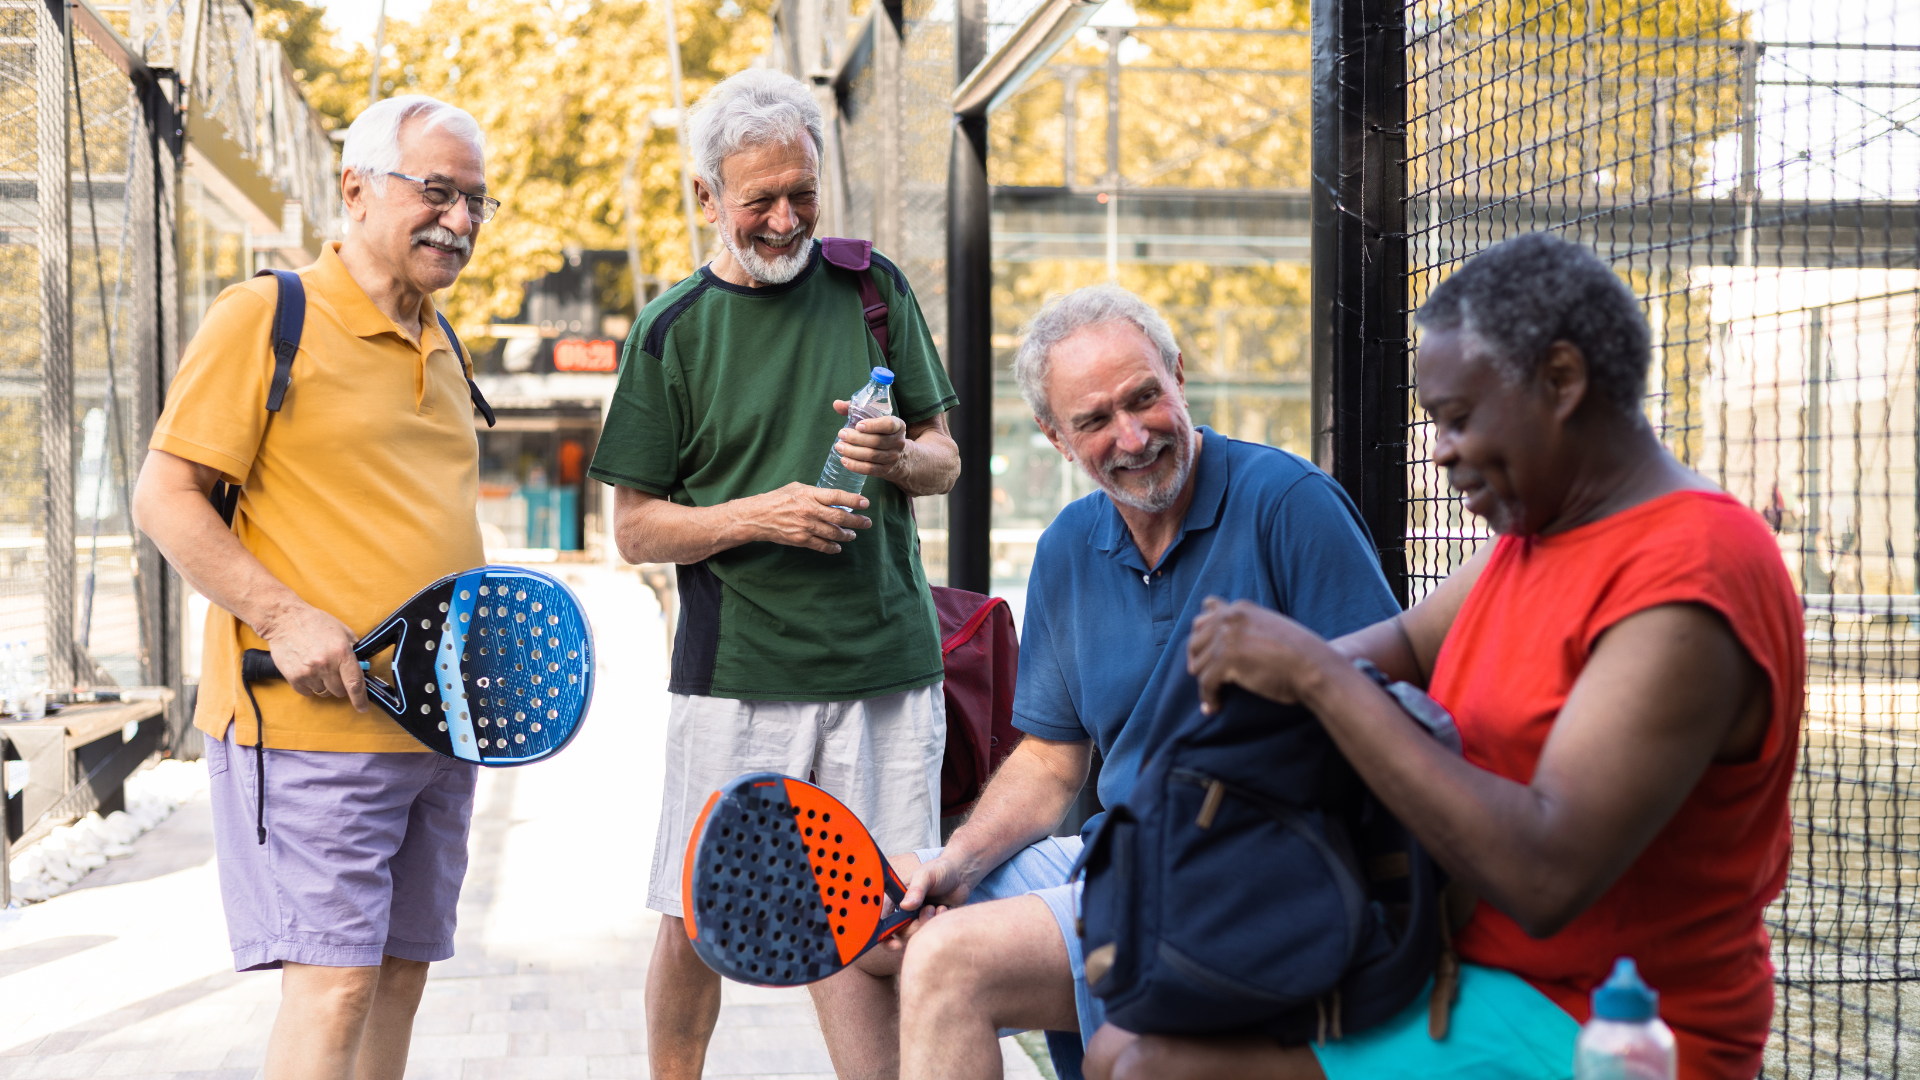 A group of four older people are gathered outside the local tennis court with pickleball rackets and equipment.